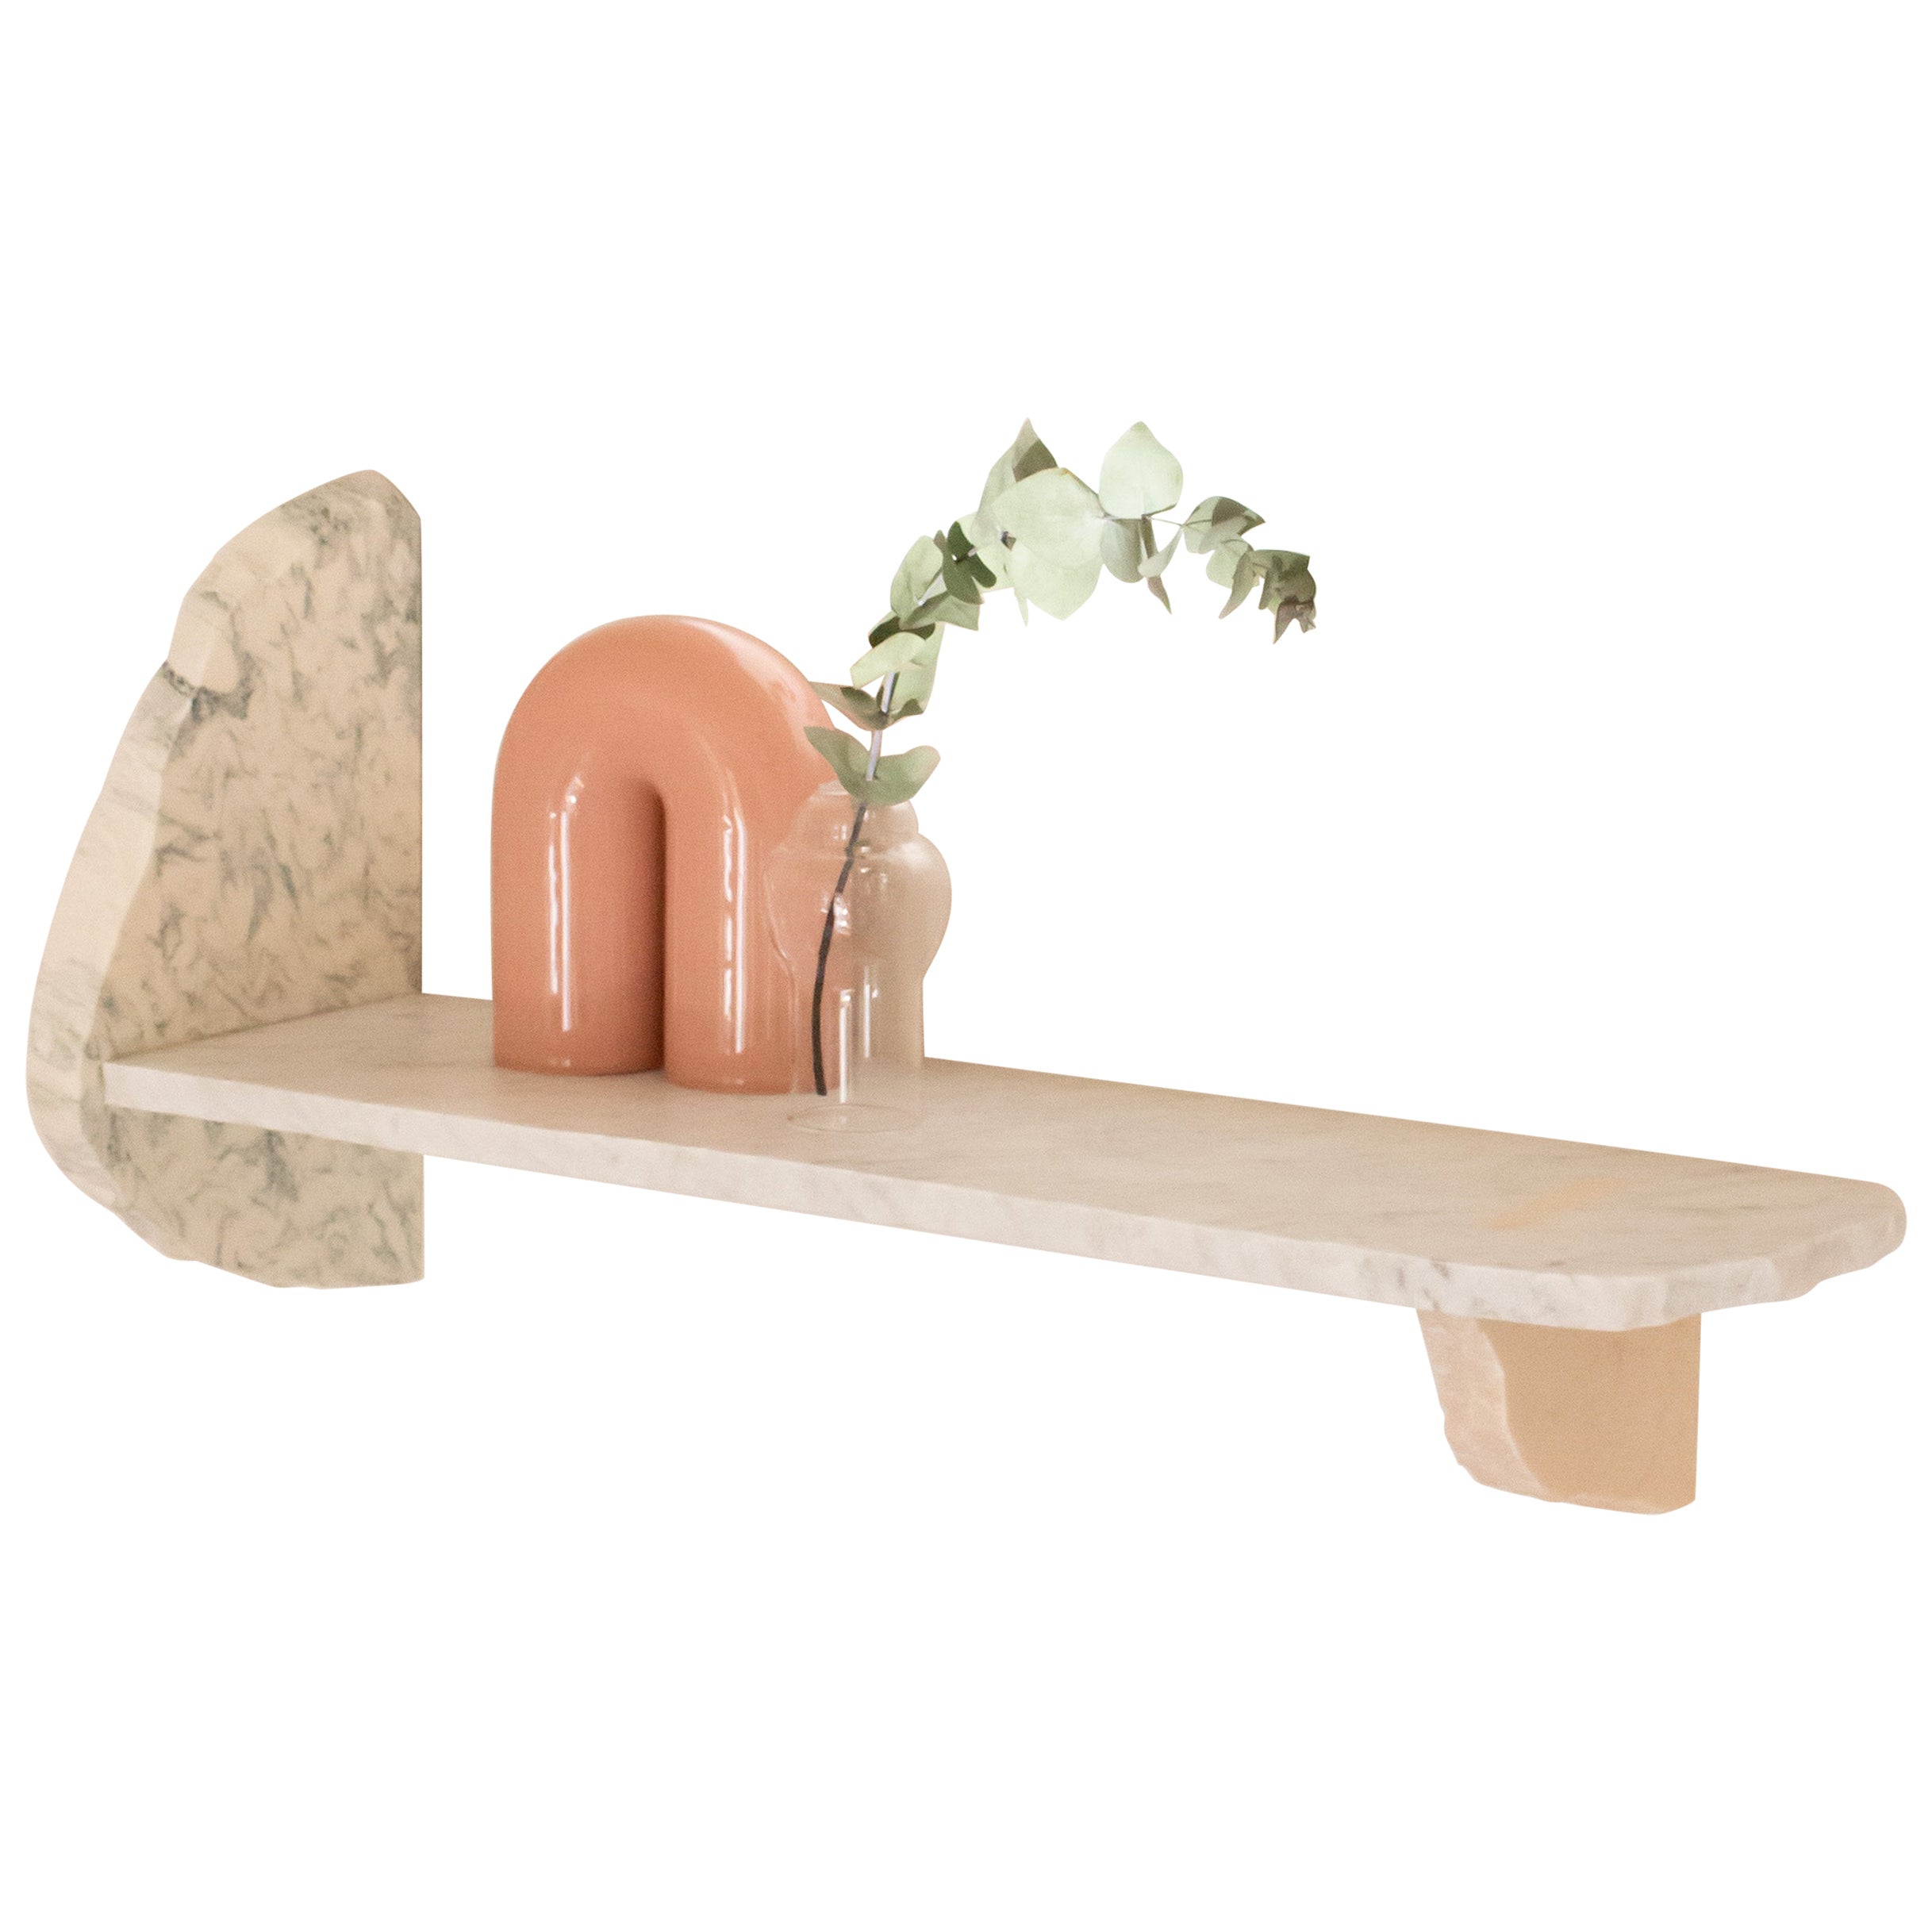 21st Century Contemporary Mixed Marble Shelf Handmade Italy by Ilaria Bianchi For Sale